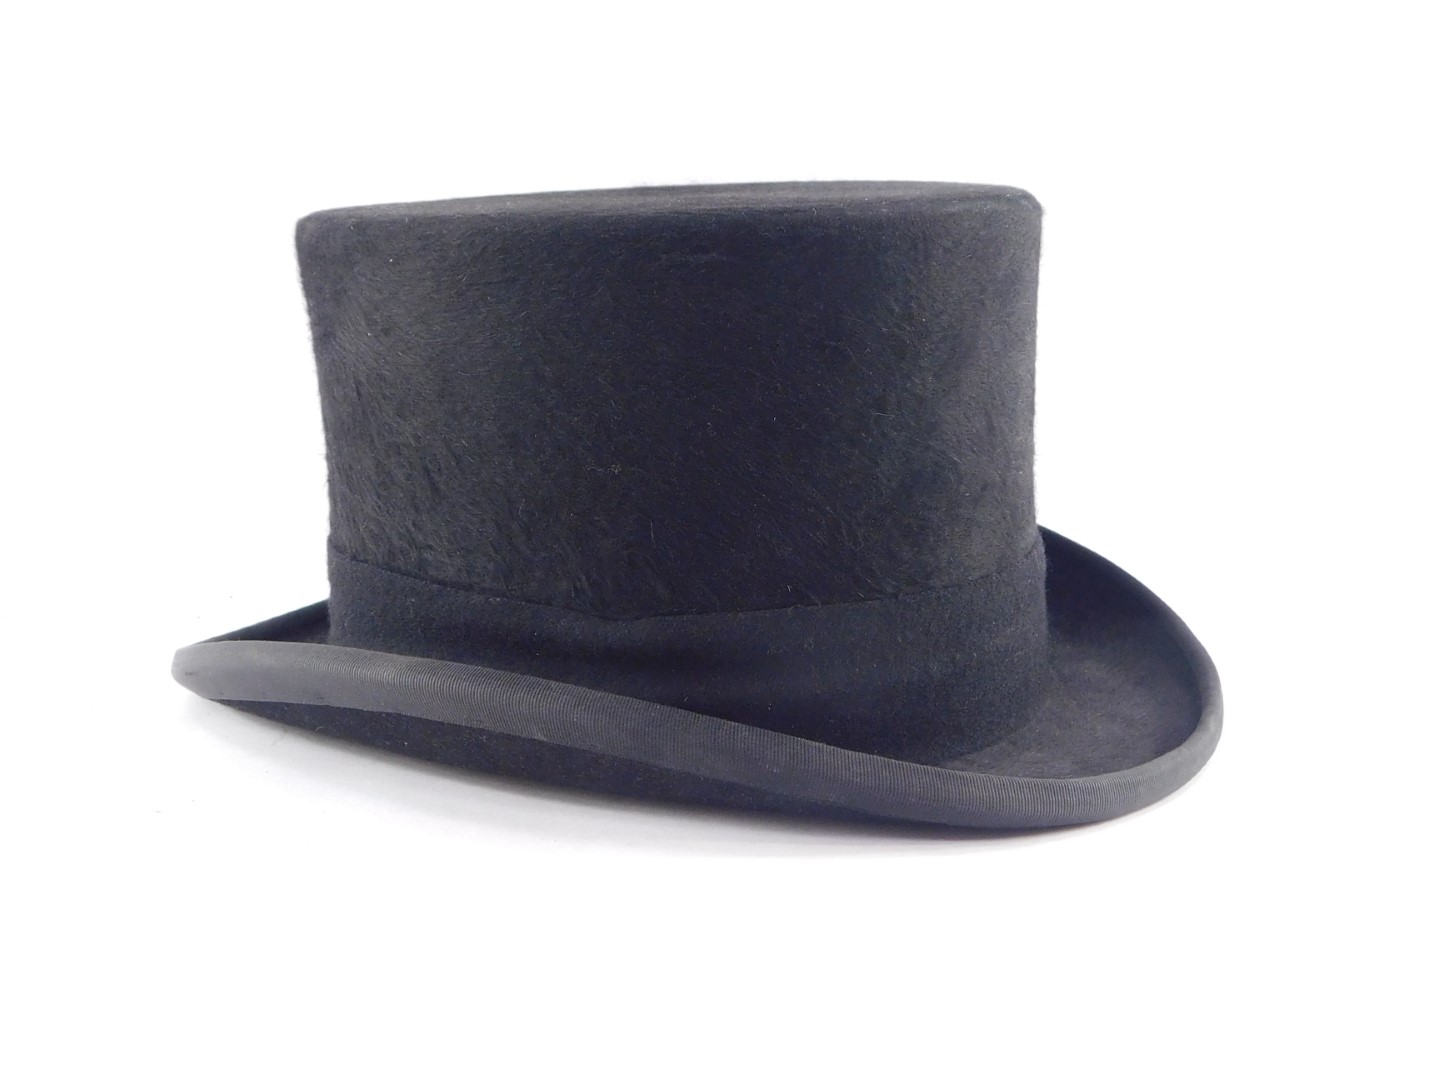 A Christies of London black top hat, inner circumference 57cm.